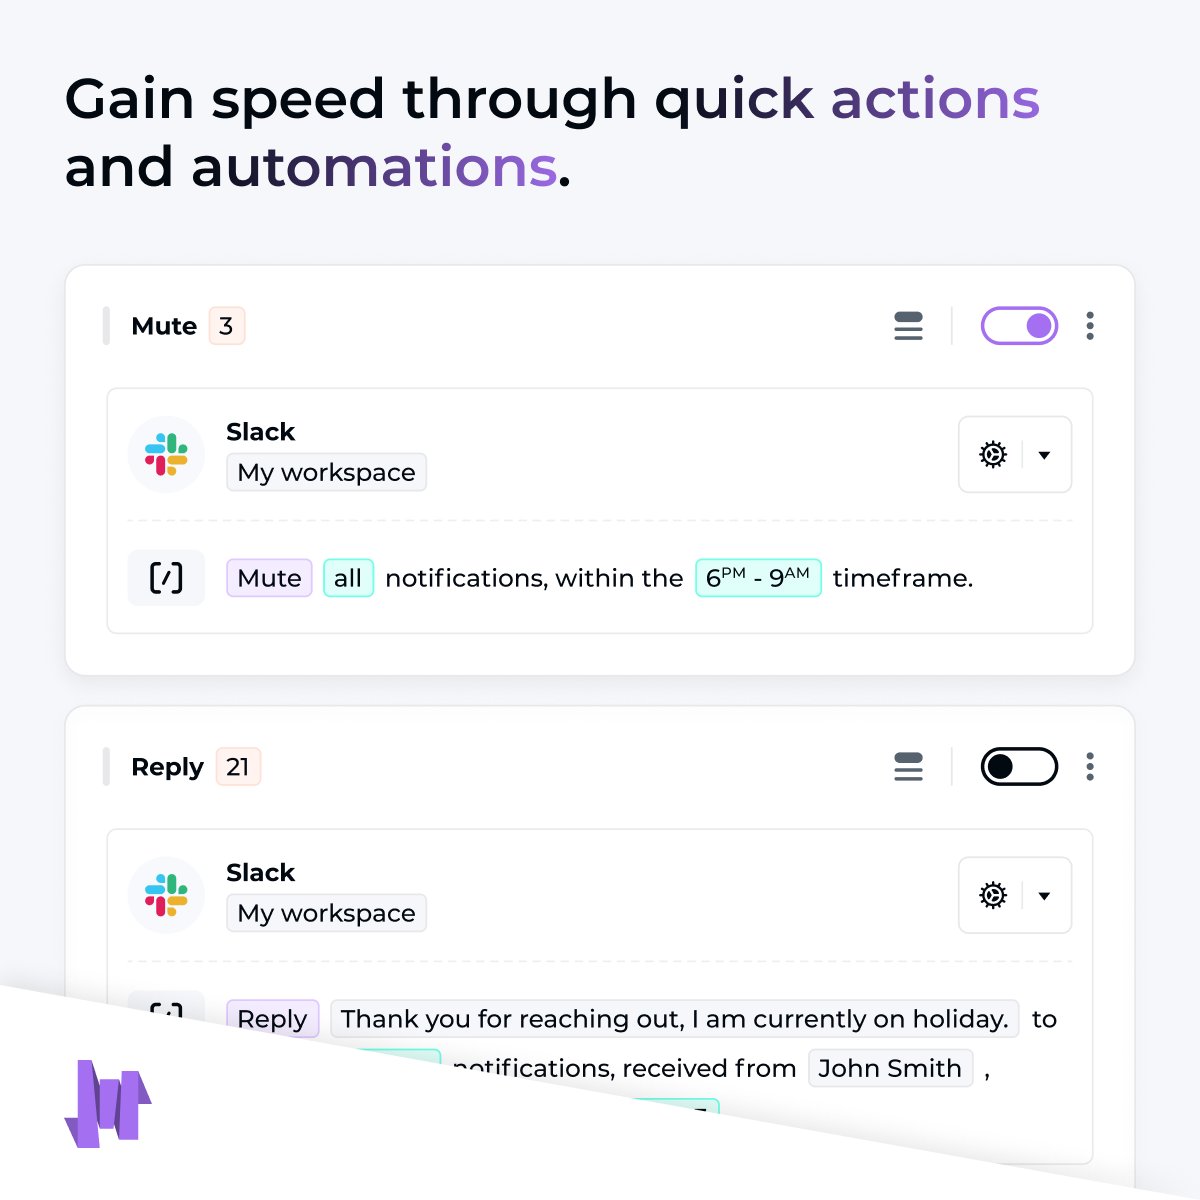 Reduce the constant need for manual intervention. Gain speed through quick actions and automation notiffy.app

#notiffy #application #machinelearning #productivitytools #businessapps #productivity #business #webapps #workflow #automationtools #aitools #projectmanager